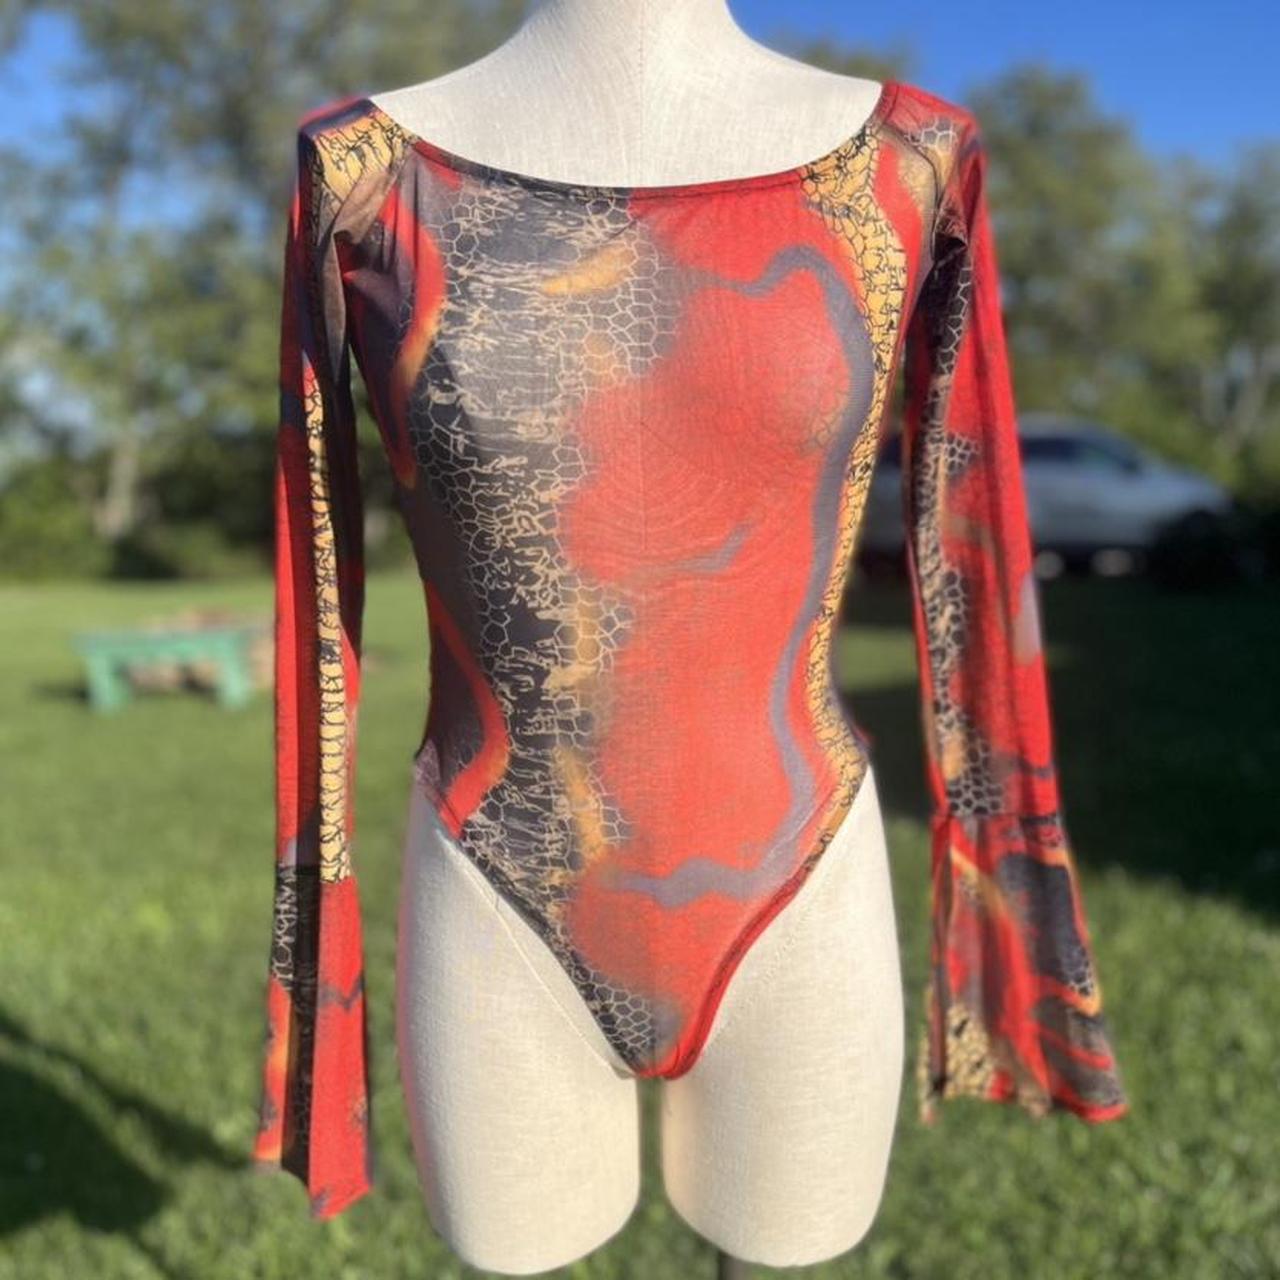 Black Scale Women's Red and Black Bodysuit